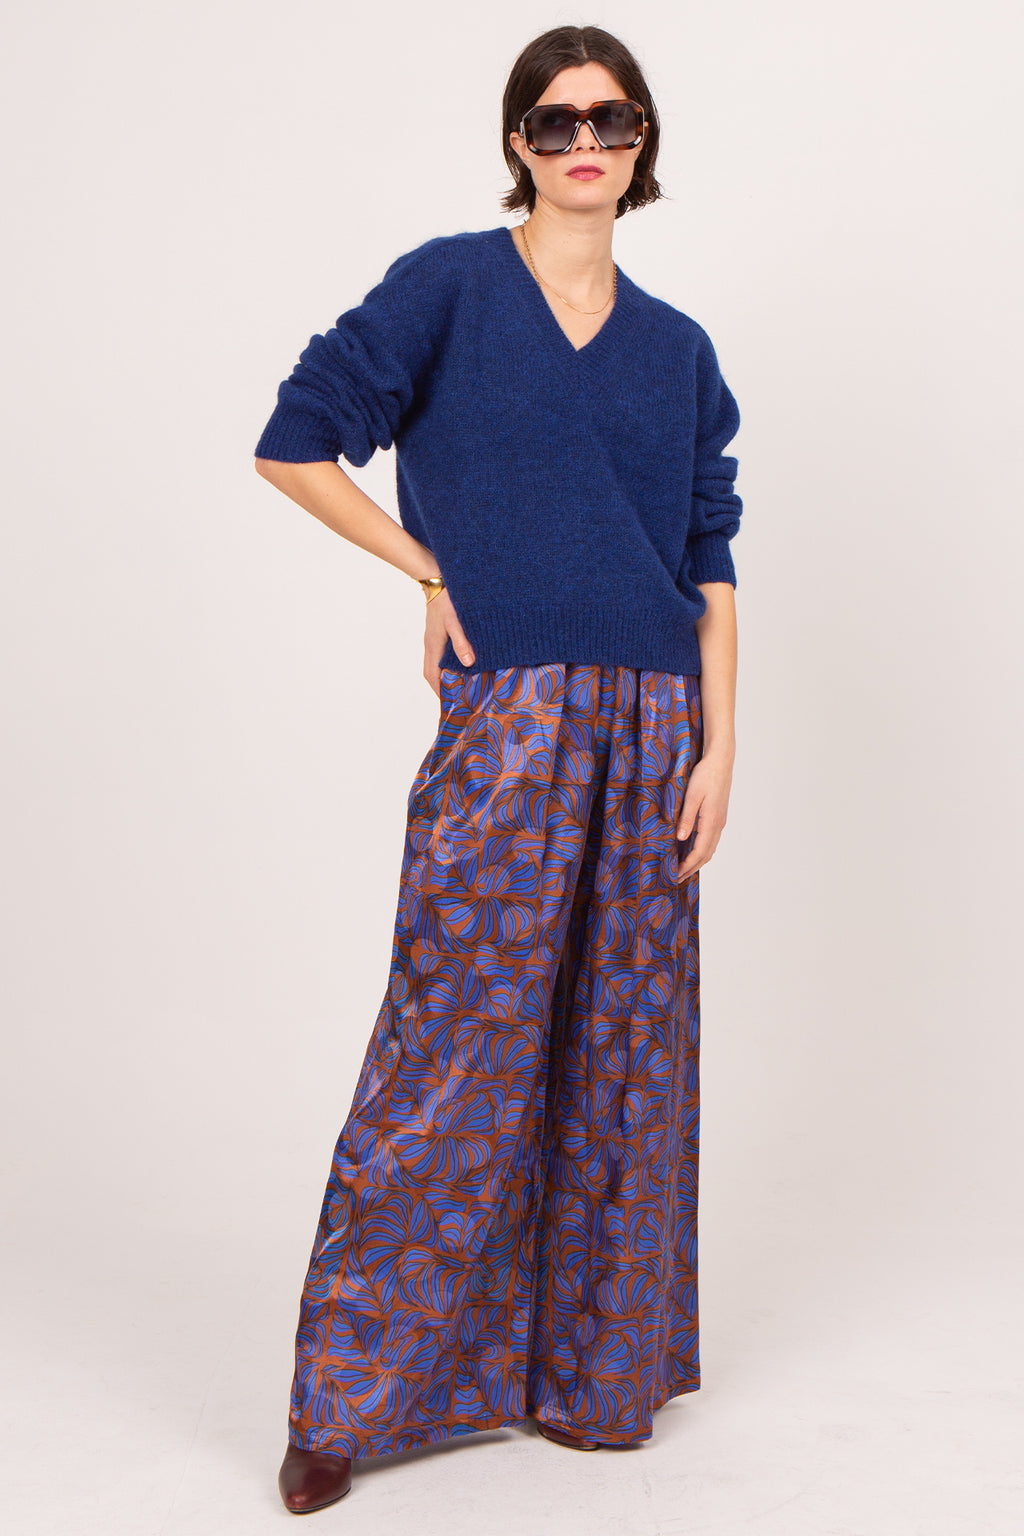 Clinton palazzo trousers in brown blue leaves